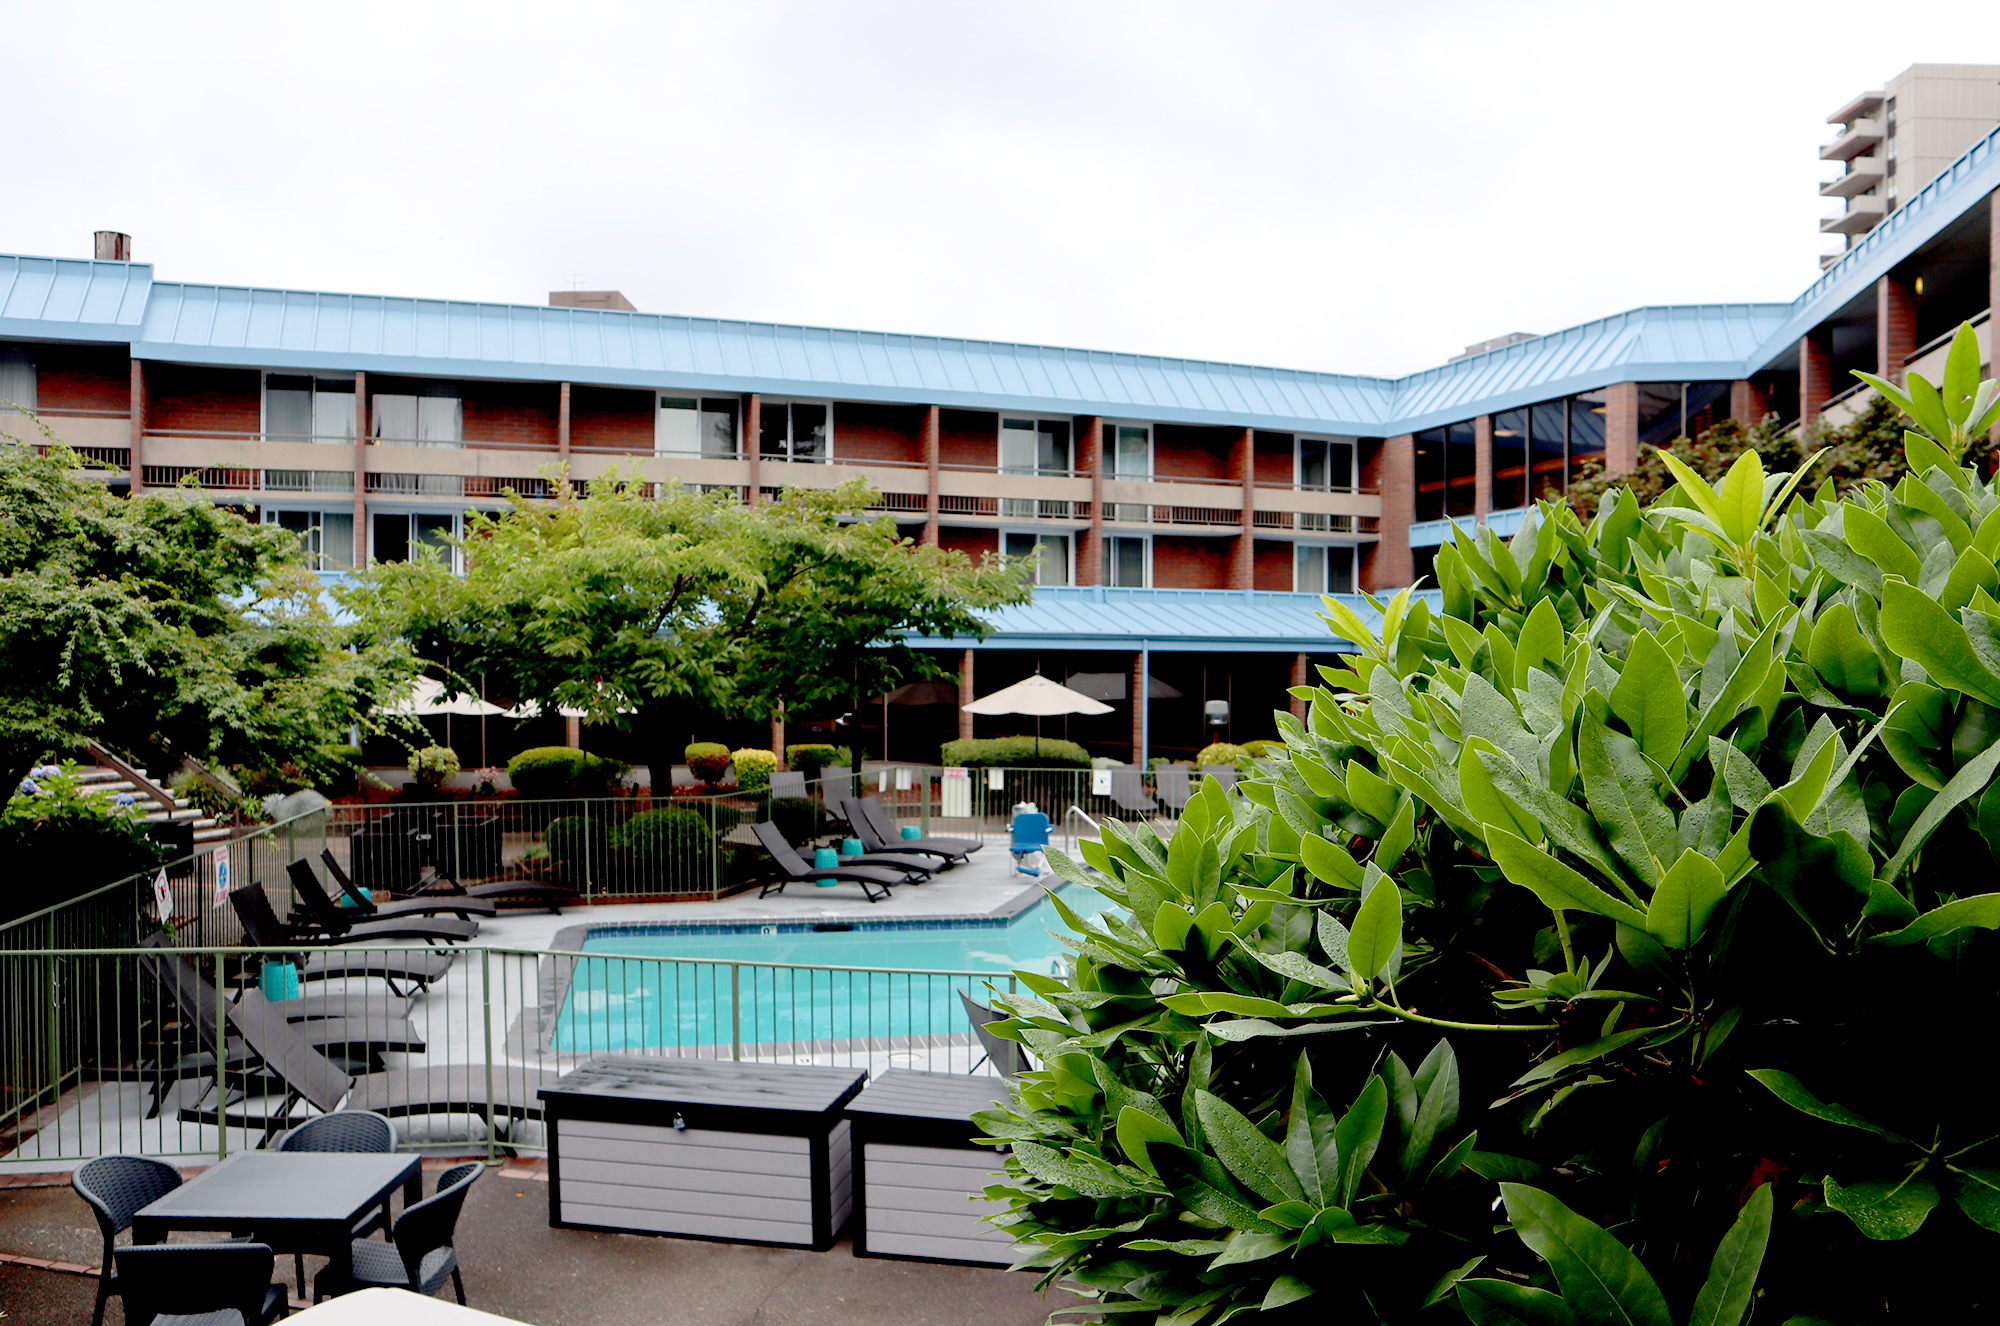 University Place Hotel offers reasonable rates, meeting rooms and a pool.